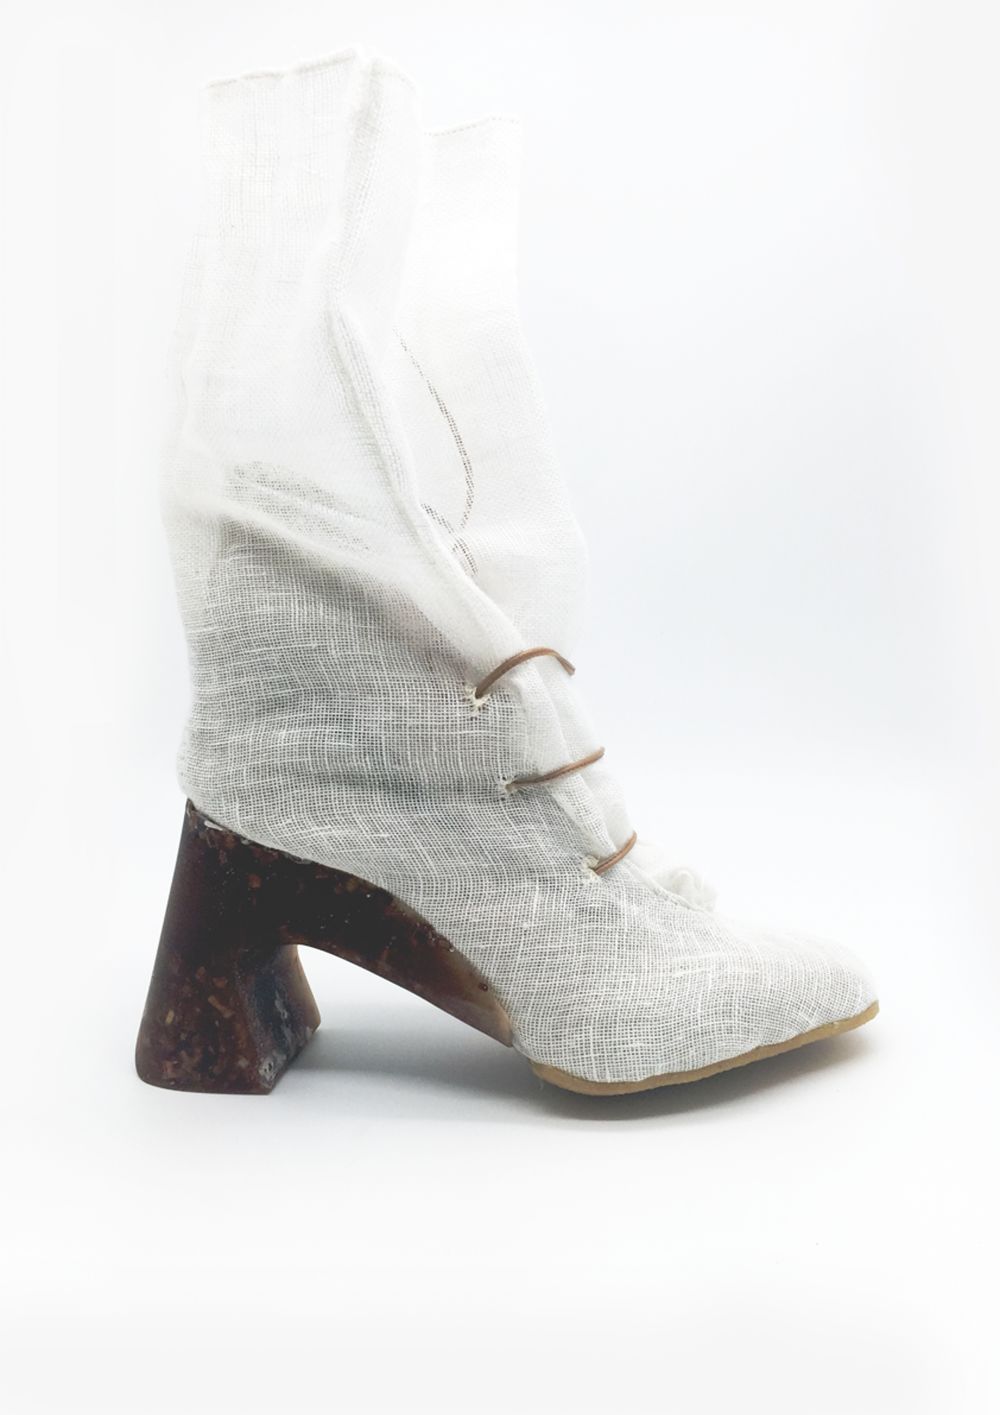 Heeled boot made of torn mesh material